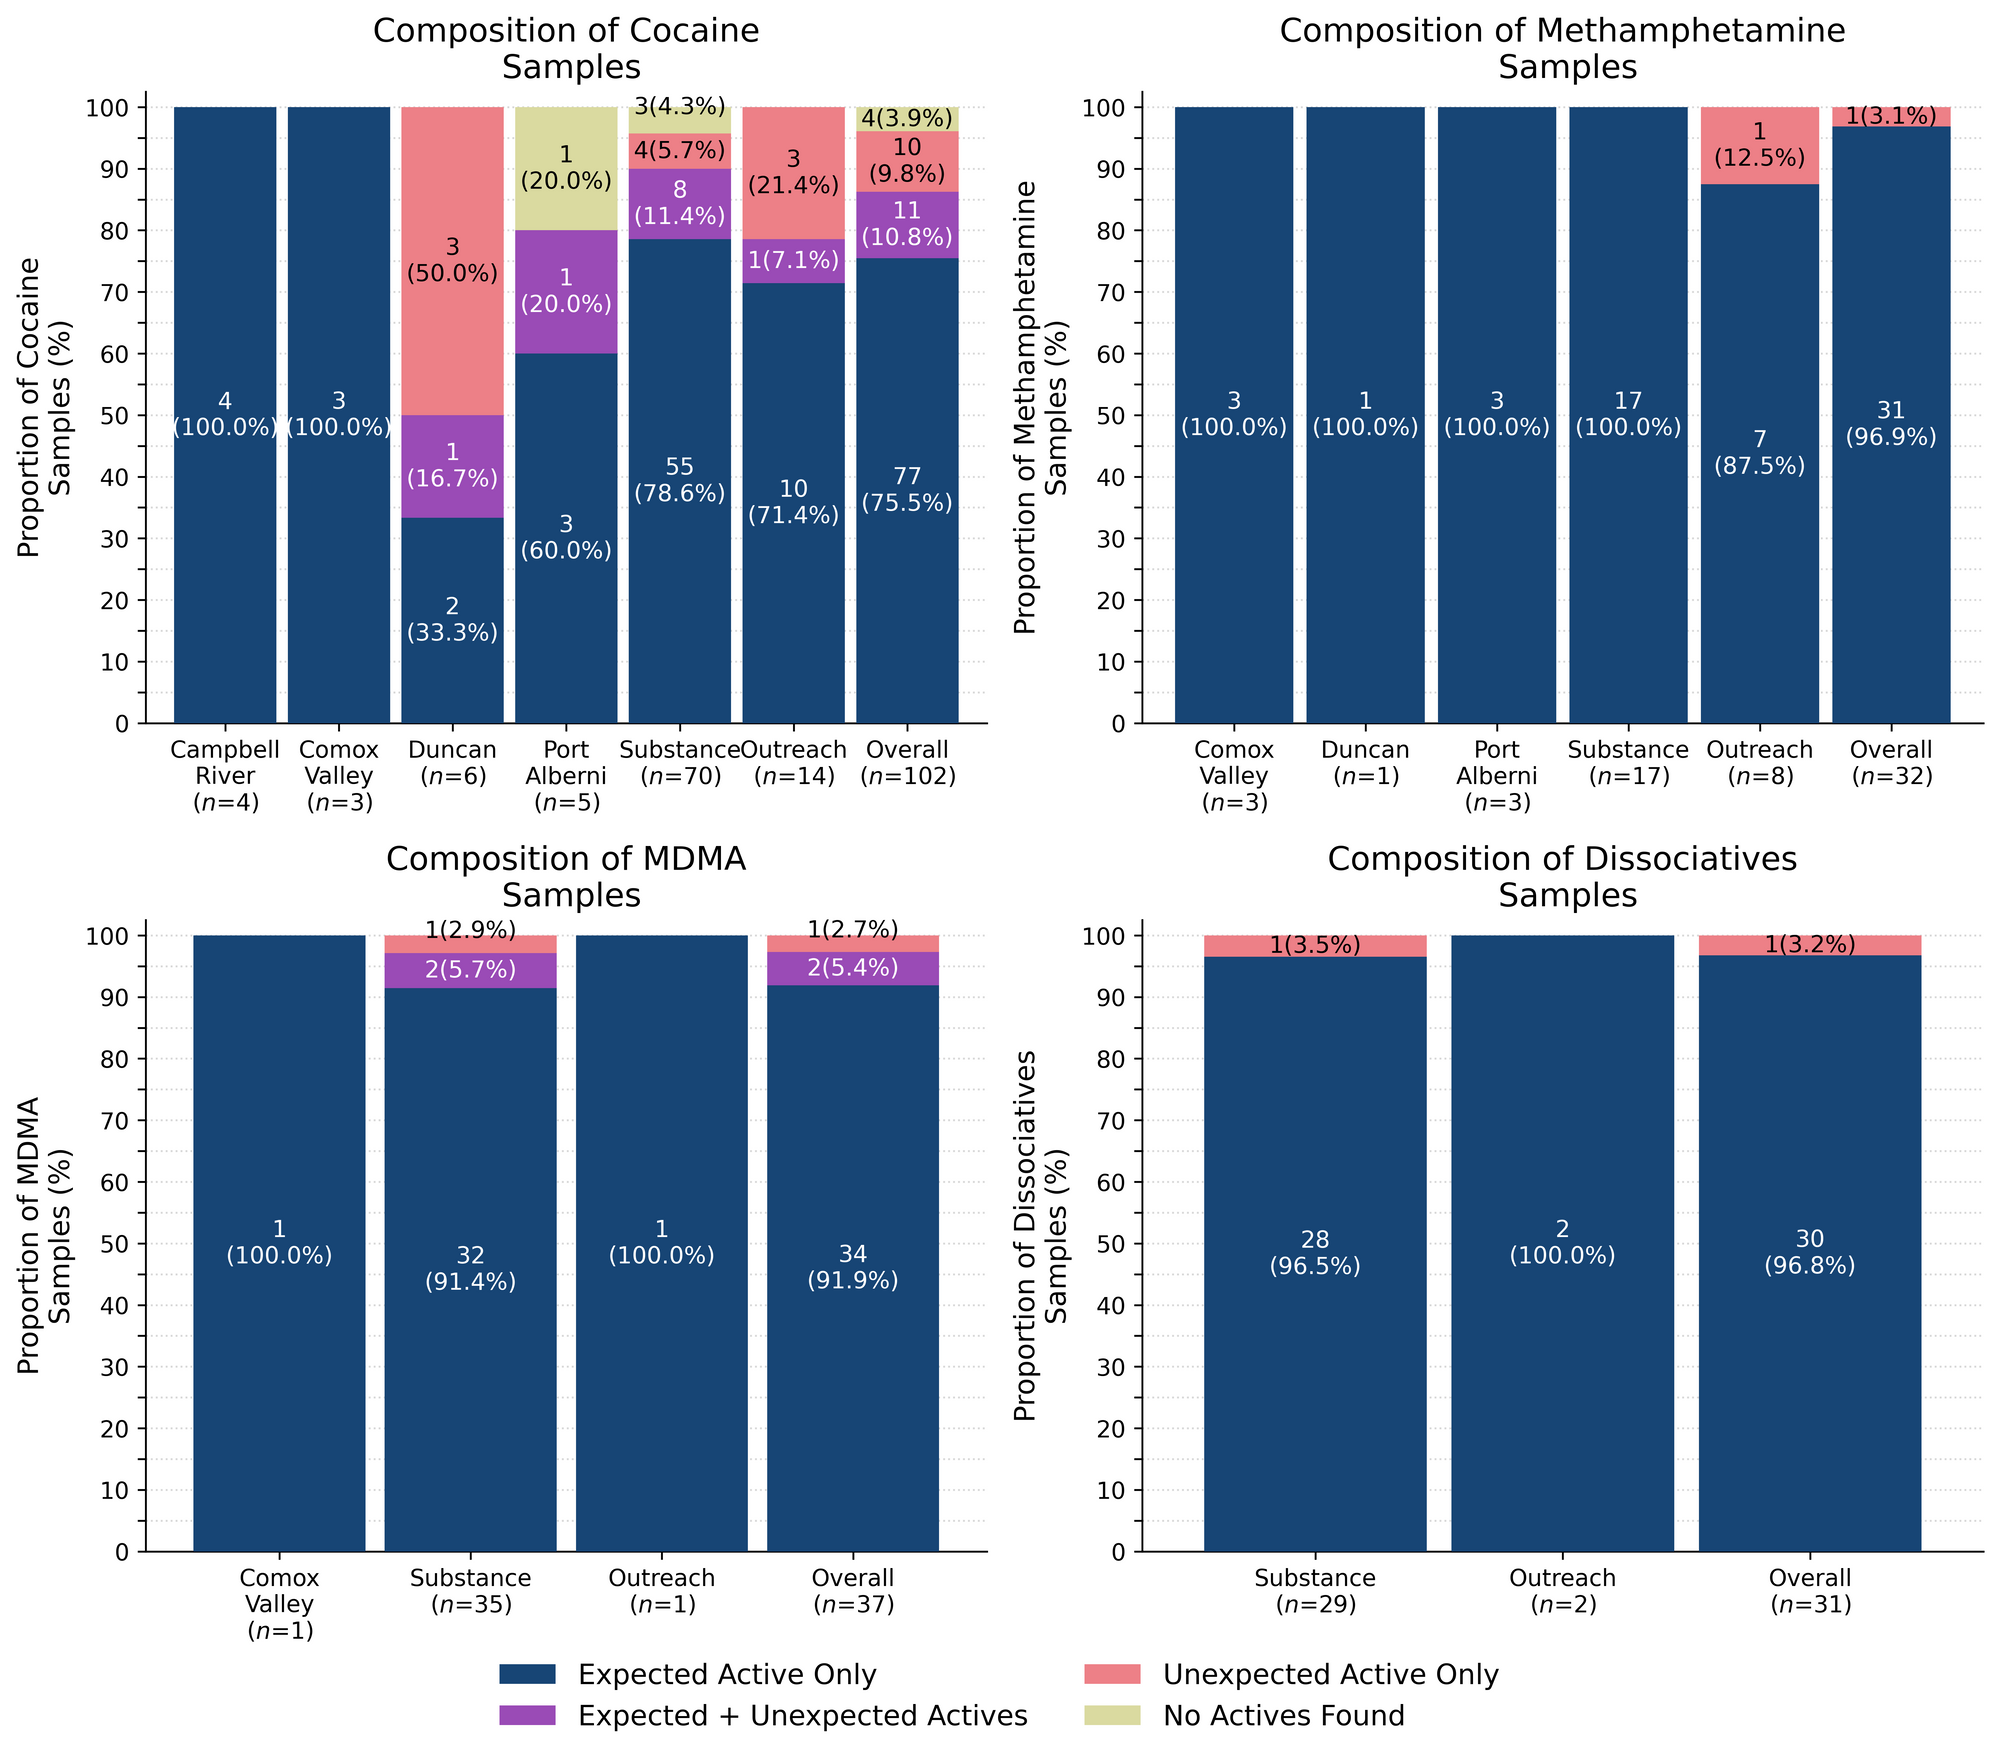 Figure 2. Compositional breakdown by drug class and sample collection location/method. Bars are stacked by the percentage of samples in each category, with the individual sample counts (and relative proportions) overlaid. "Dark Blue" regions group samples that were simply as expected with no other notable compounds detected, "Magenta" shows samples that contained the expected drug and contained an unexpected active, "Salmon" groups samples that only contained an unexpected active (the expected drug was not found), and "Pear yellow" displays samples where no active compounds were detected.